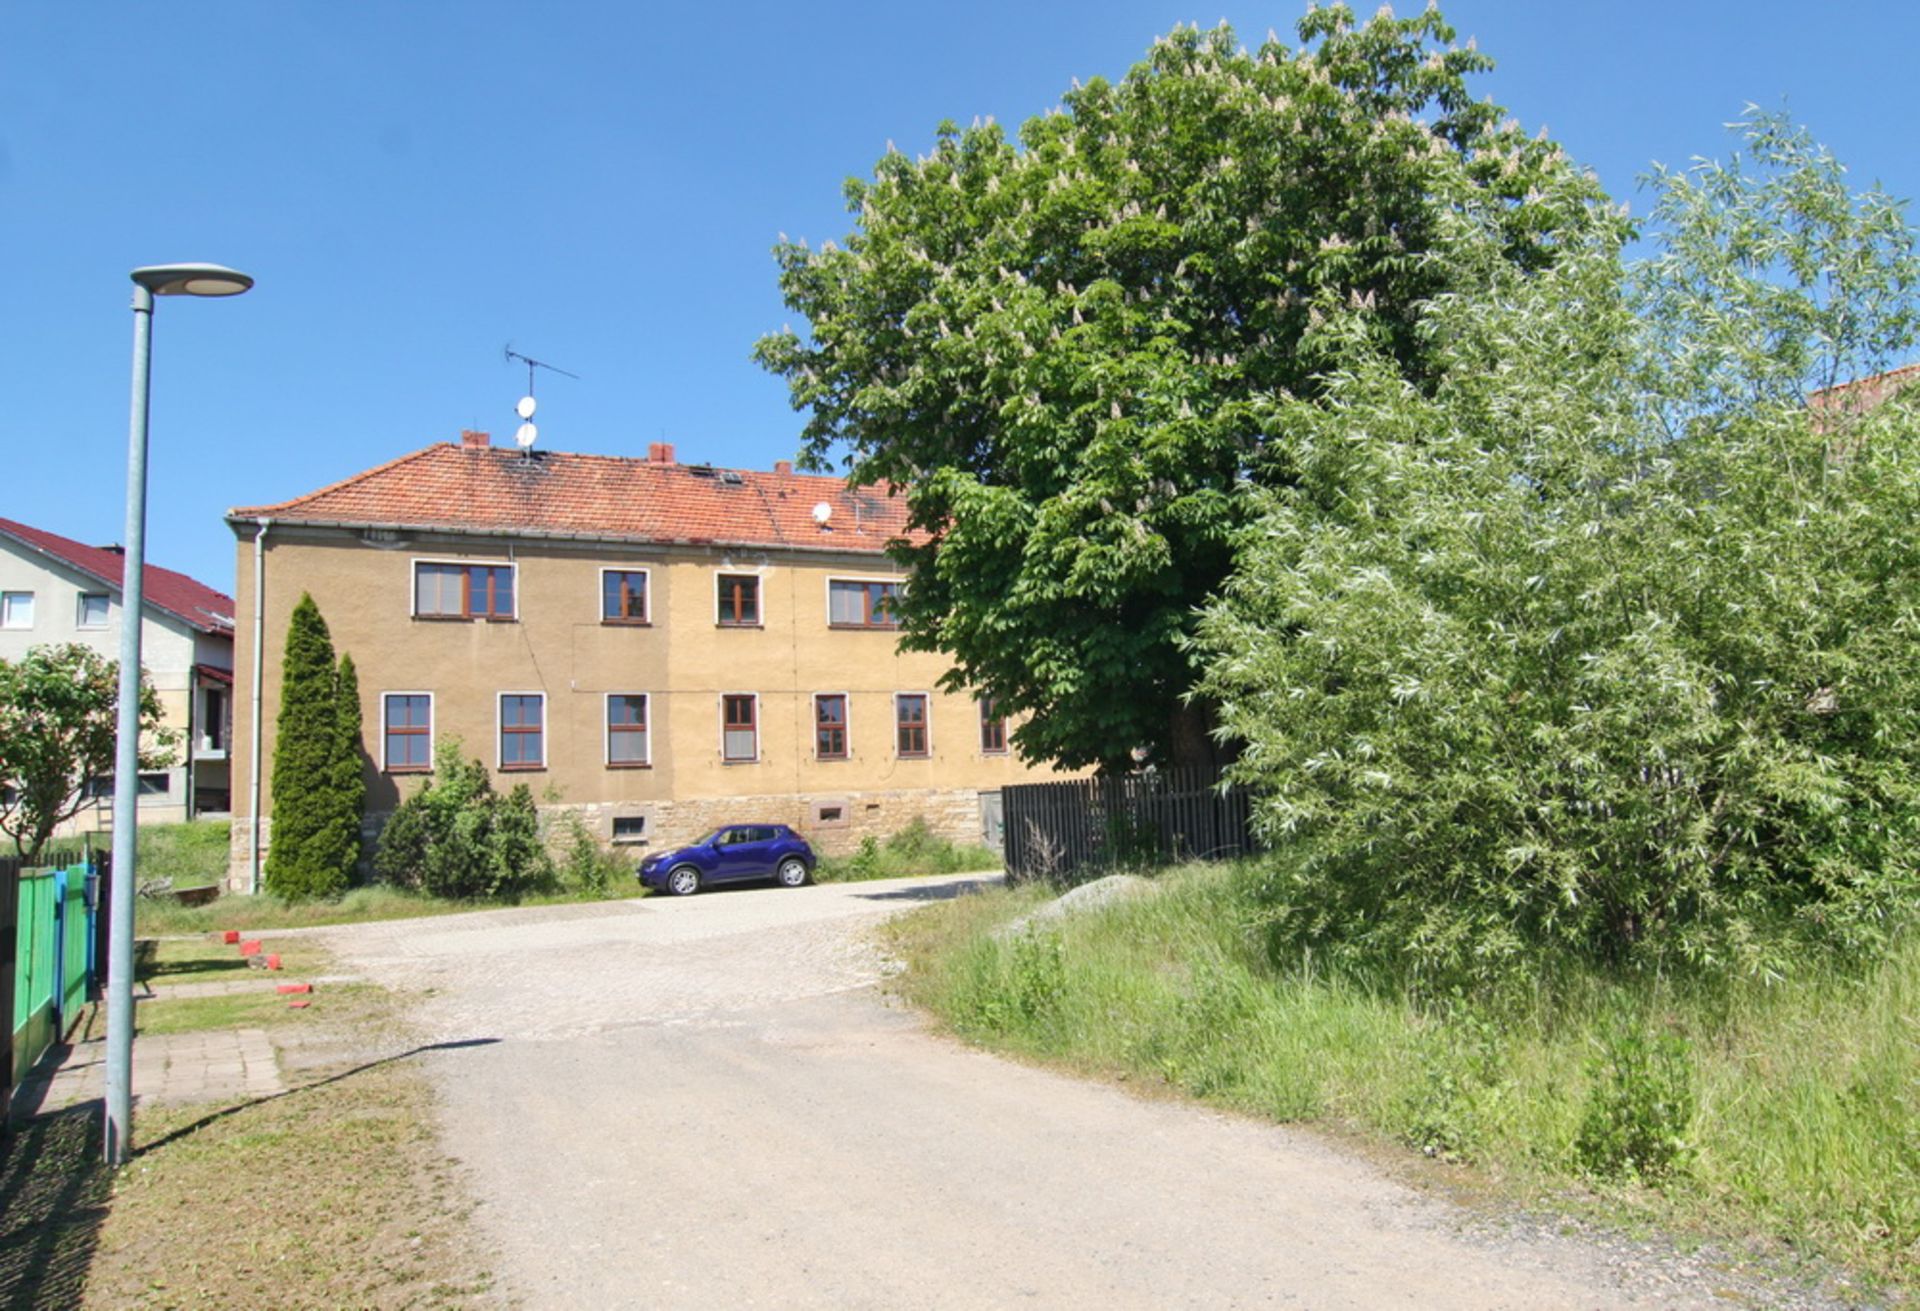 LARGE HOUSING BLOCK IN HORNSOMMEM, GERMANY - READY TO MOVE INTO - Image 59 of 91